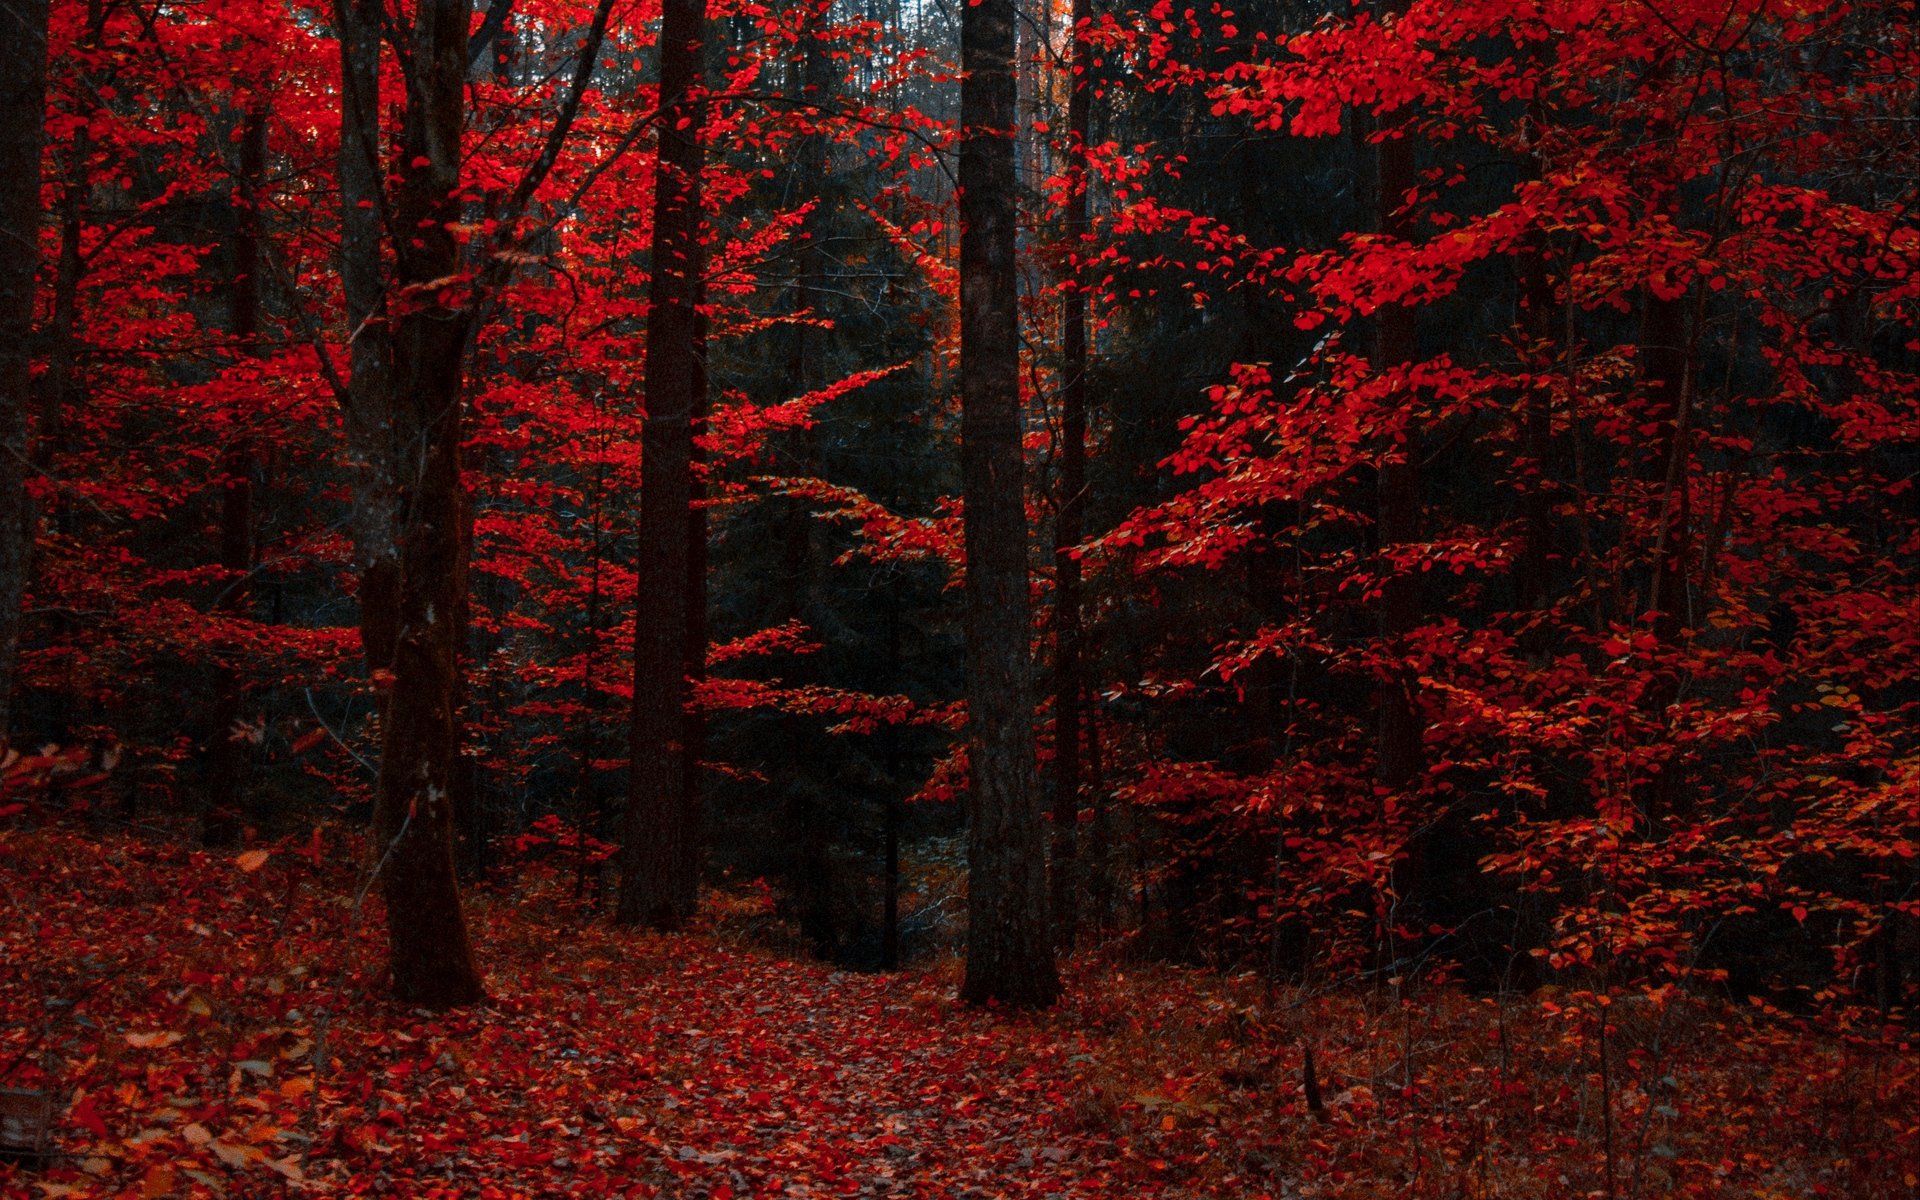 Download wallpaper 1920x1200 autumn, forest, trees, foliage